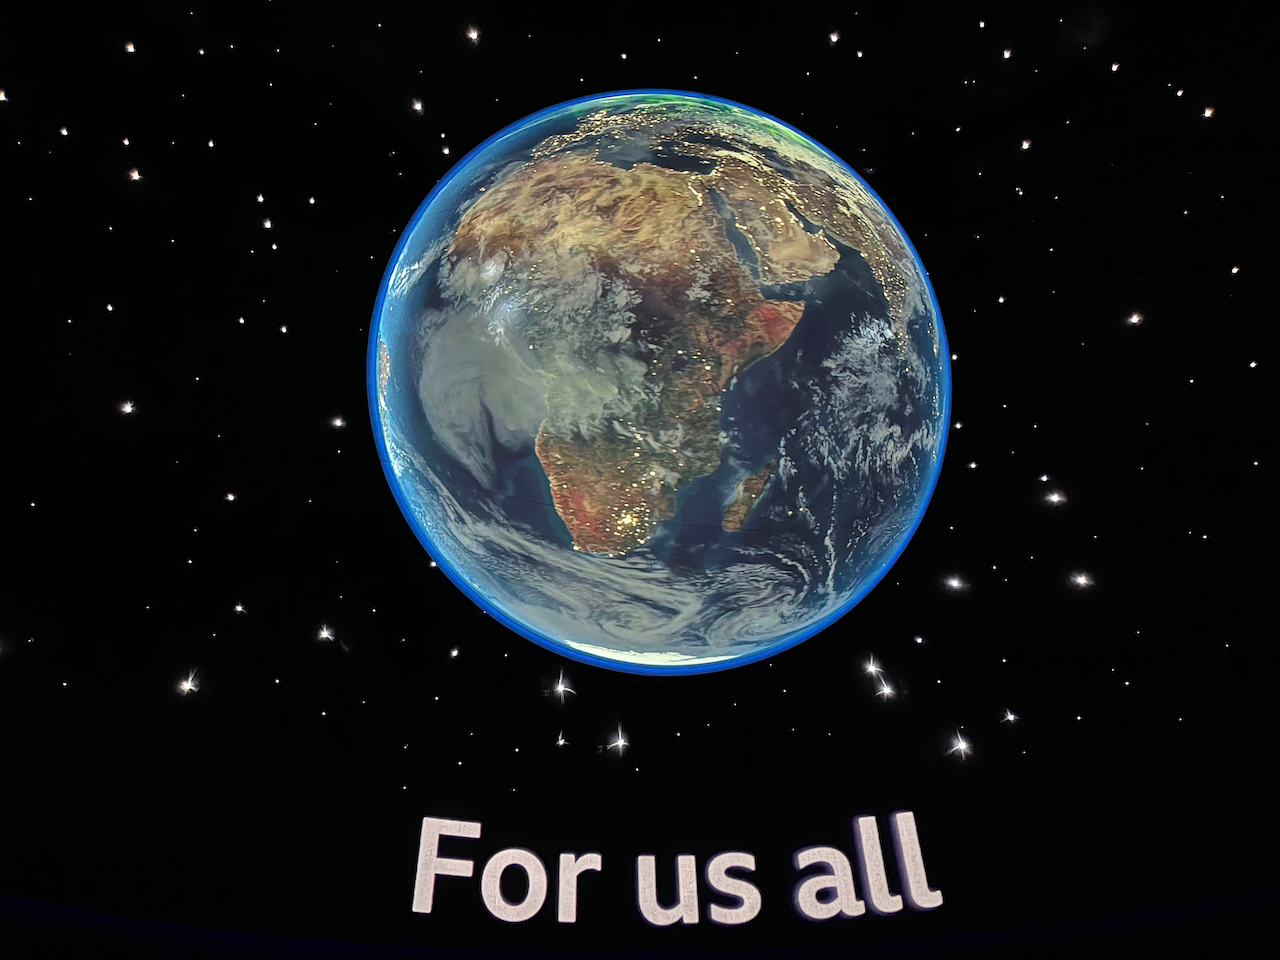 An image of planet Earth in space, surrounded by stars, above the words For us all.